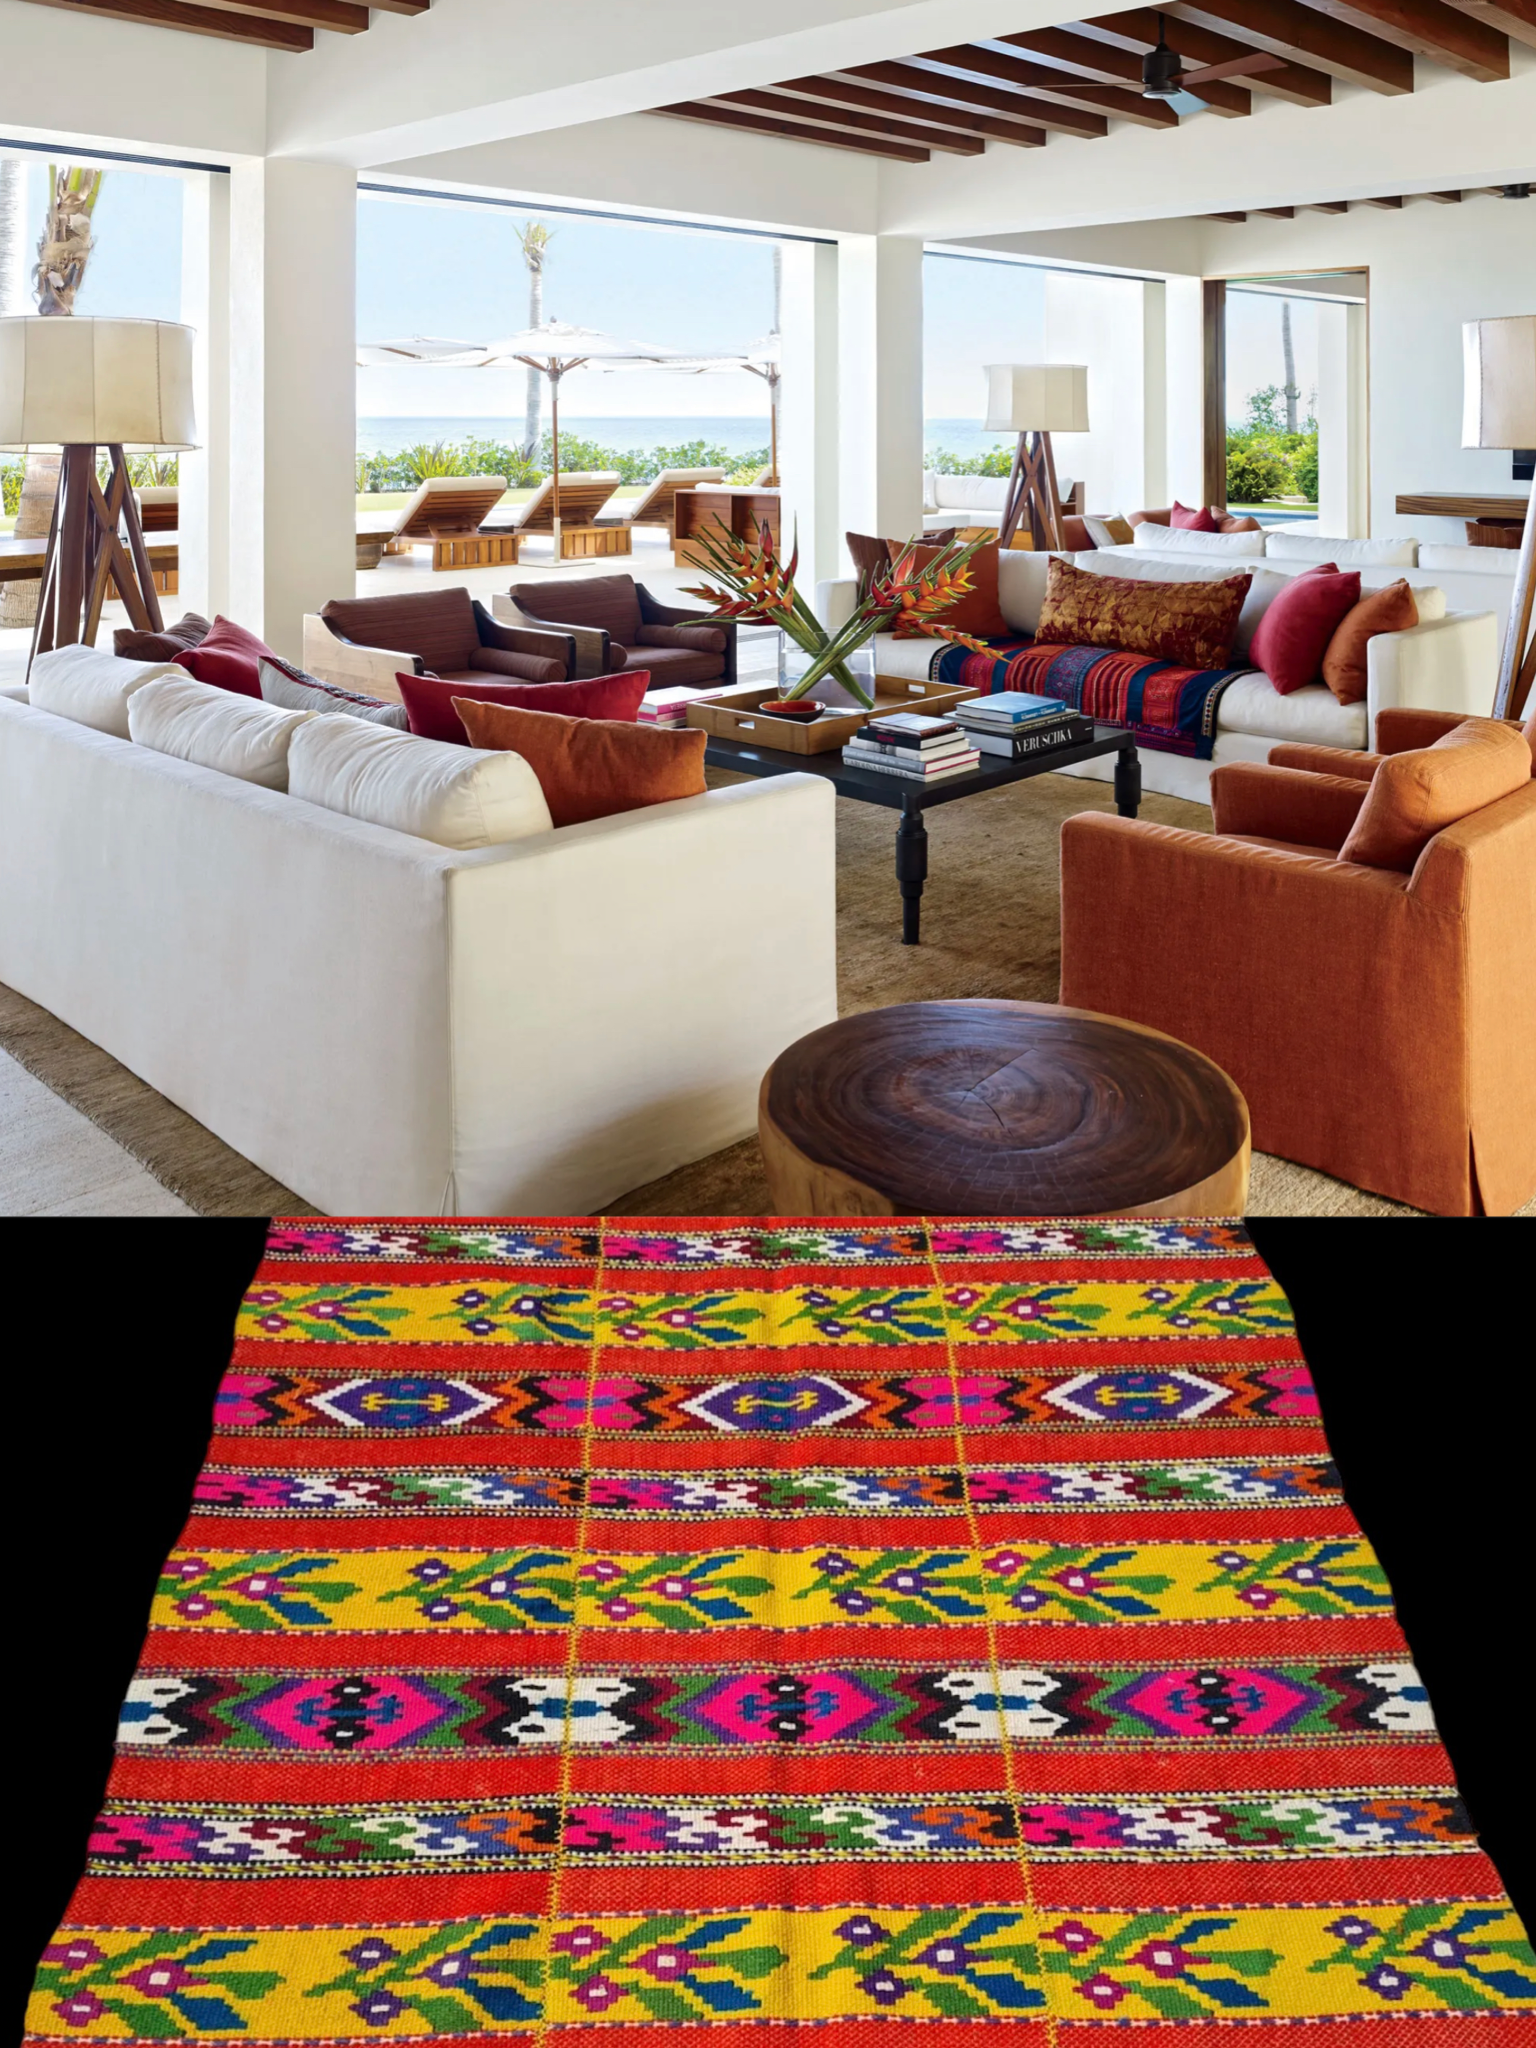 AUTHENTIC COLORFUL KILIM|Flat Weave| Vintage| Hand-Woven| Area Rug| 7’ x 4’ - Honorooroo Lifestyle